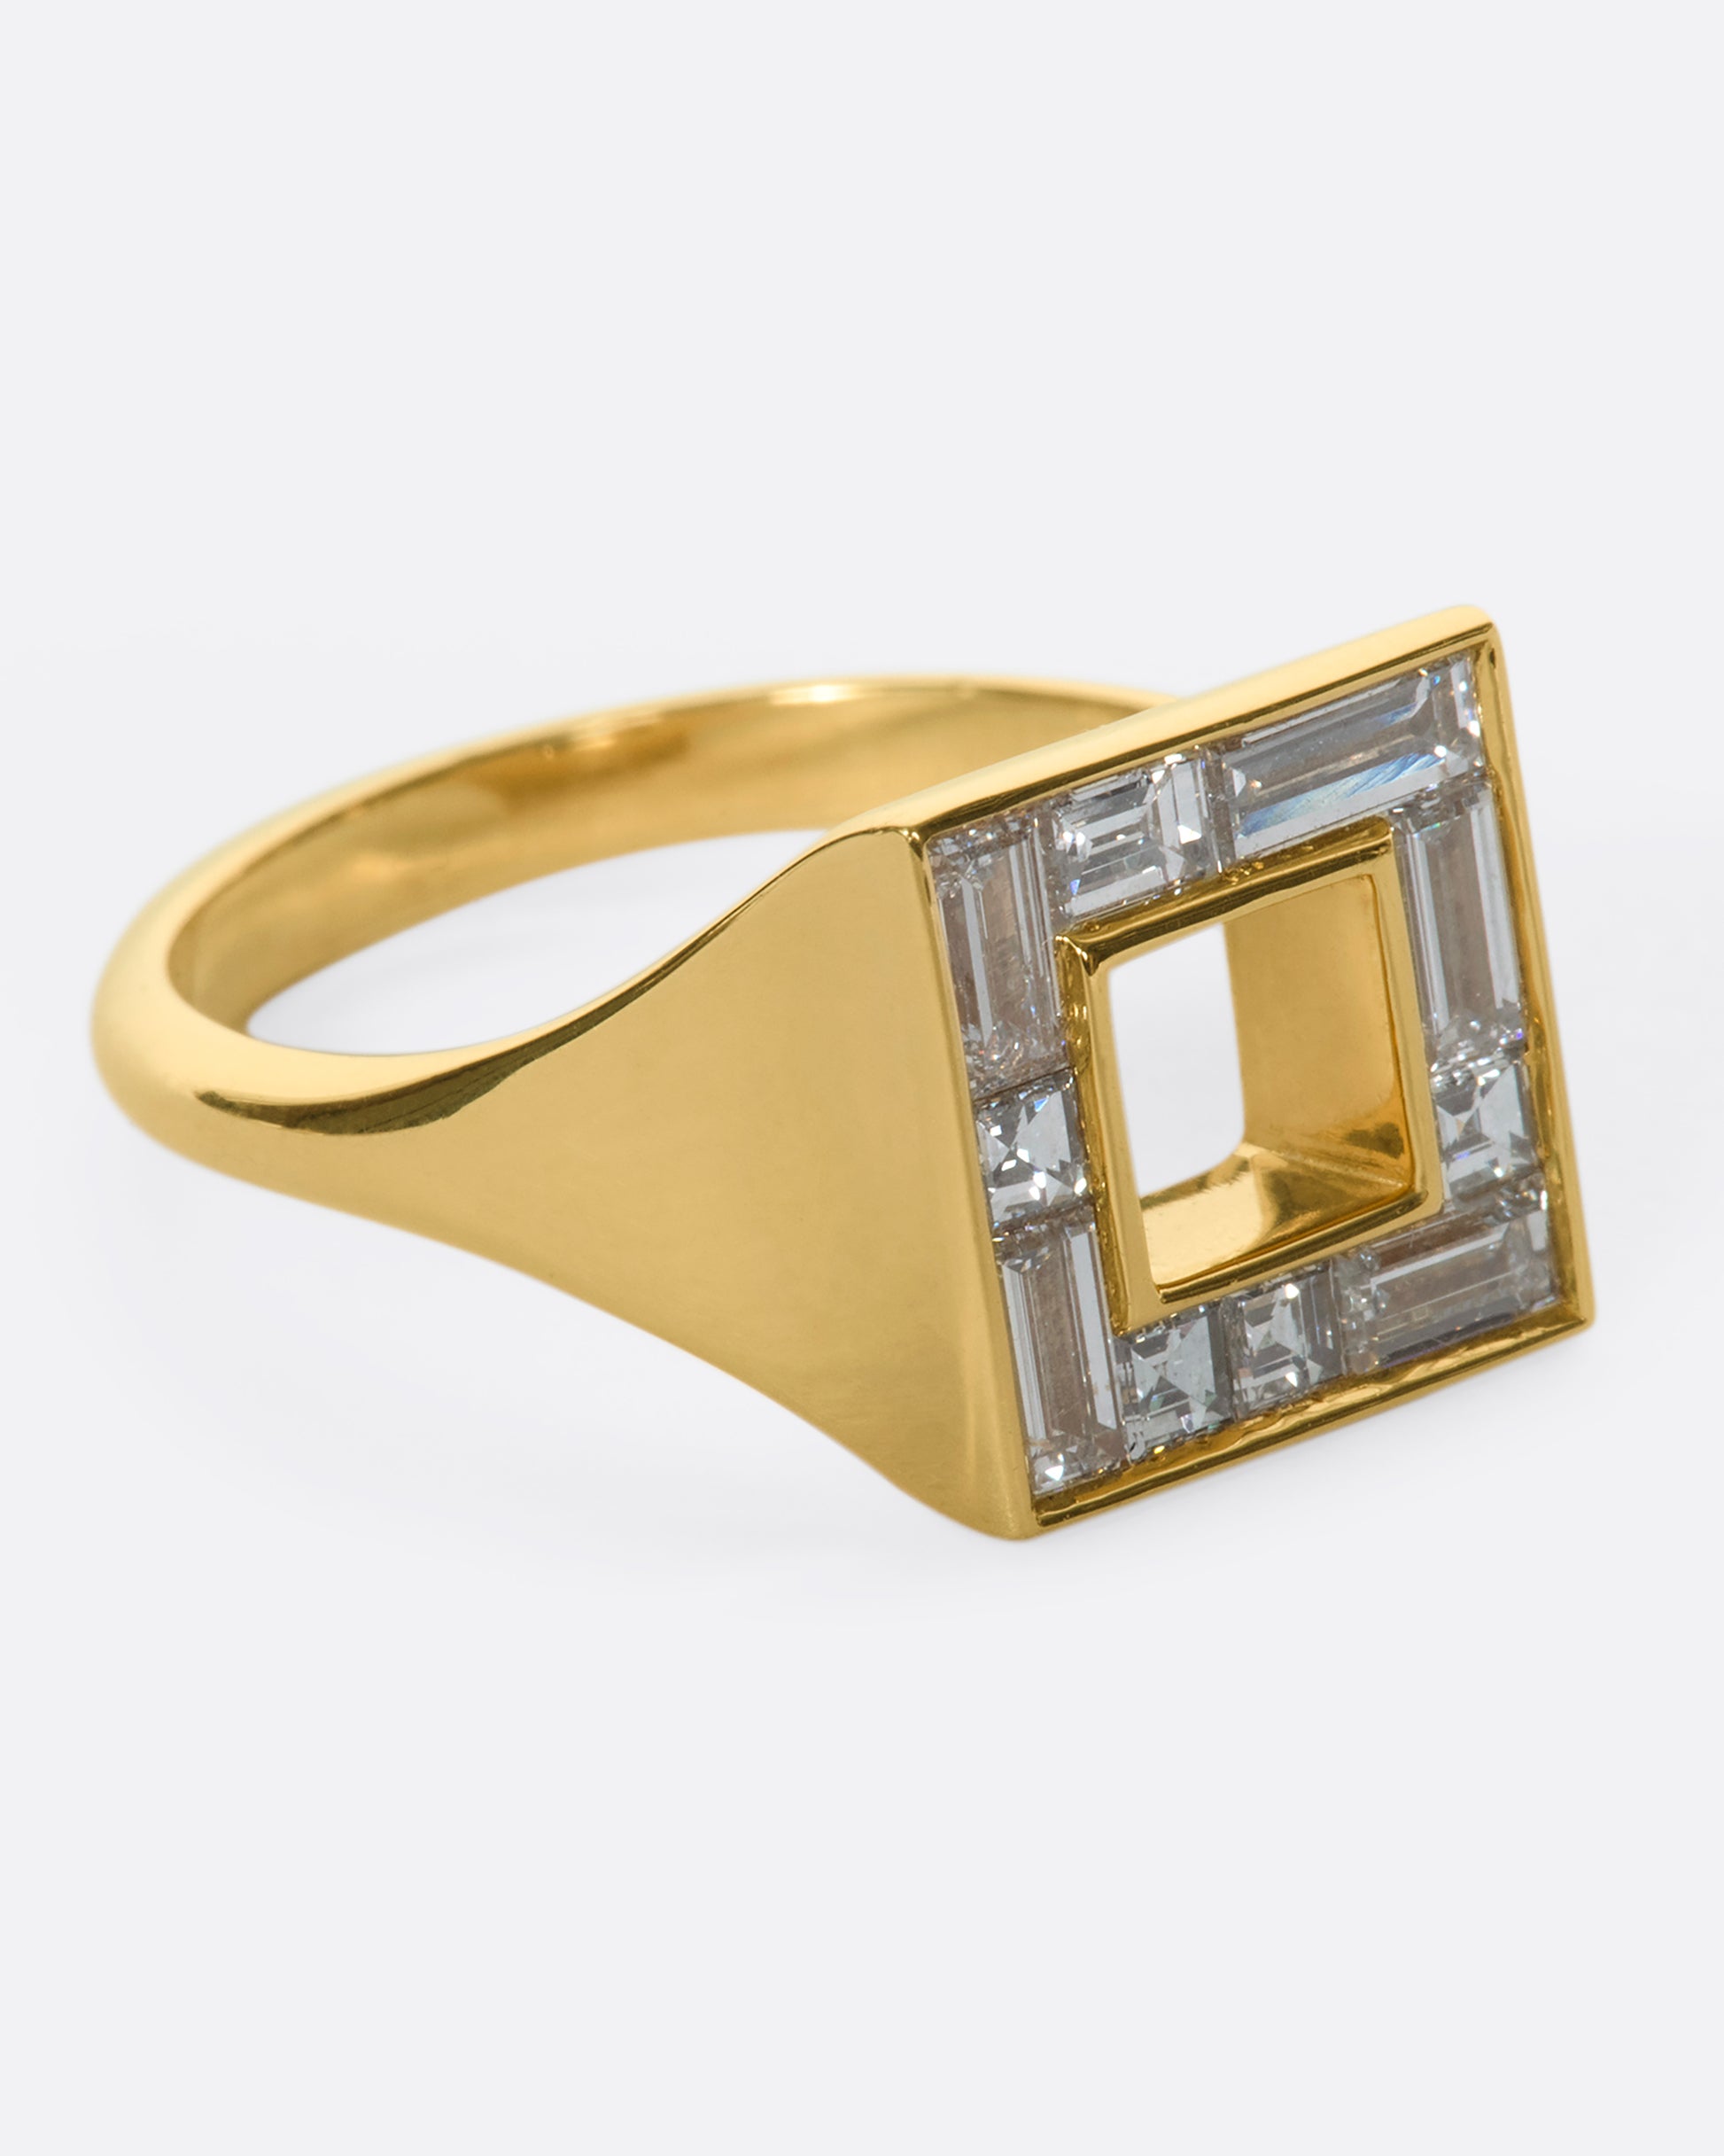 A close up of the right side of a square ring set with baguette diamonds.